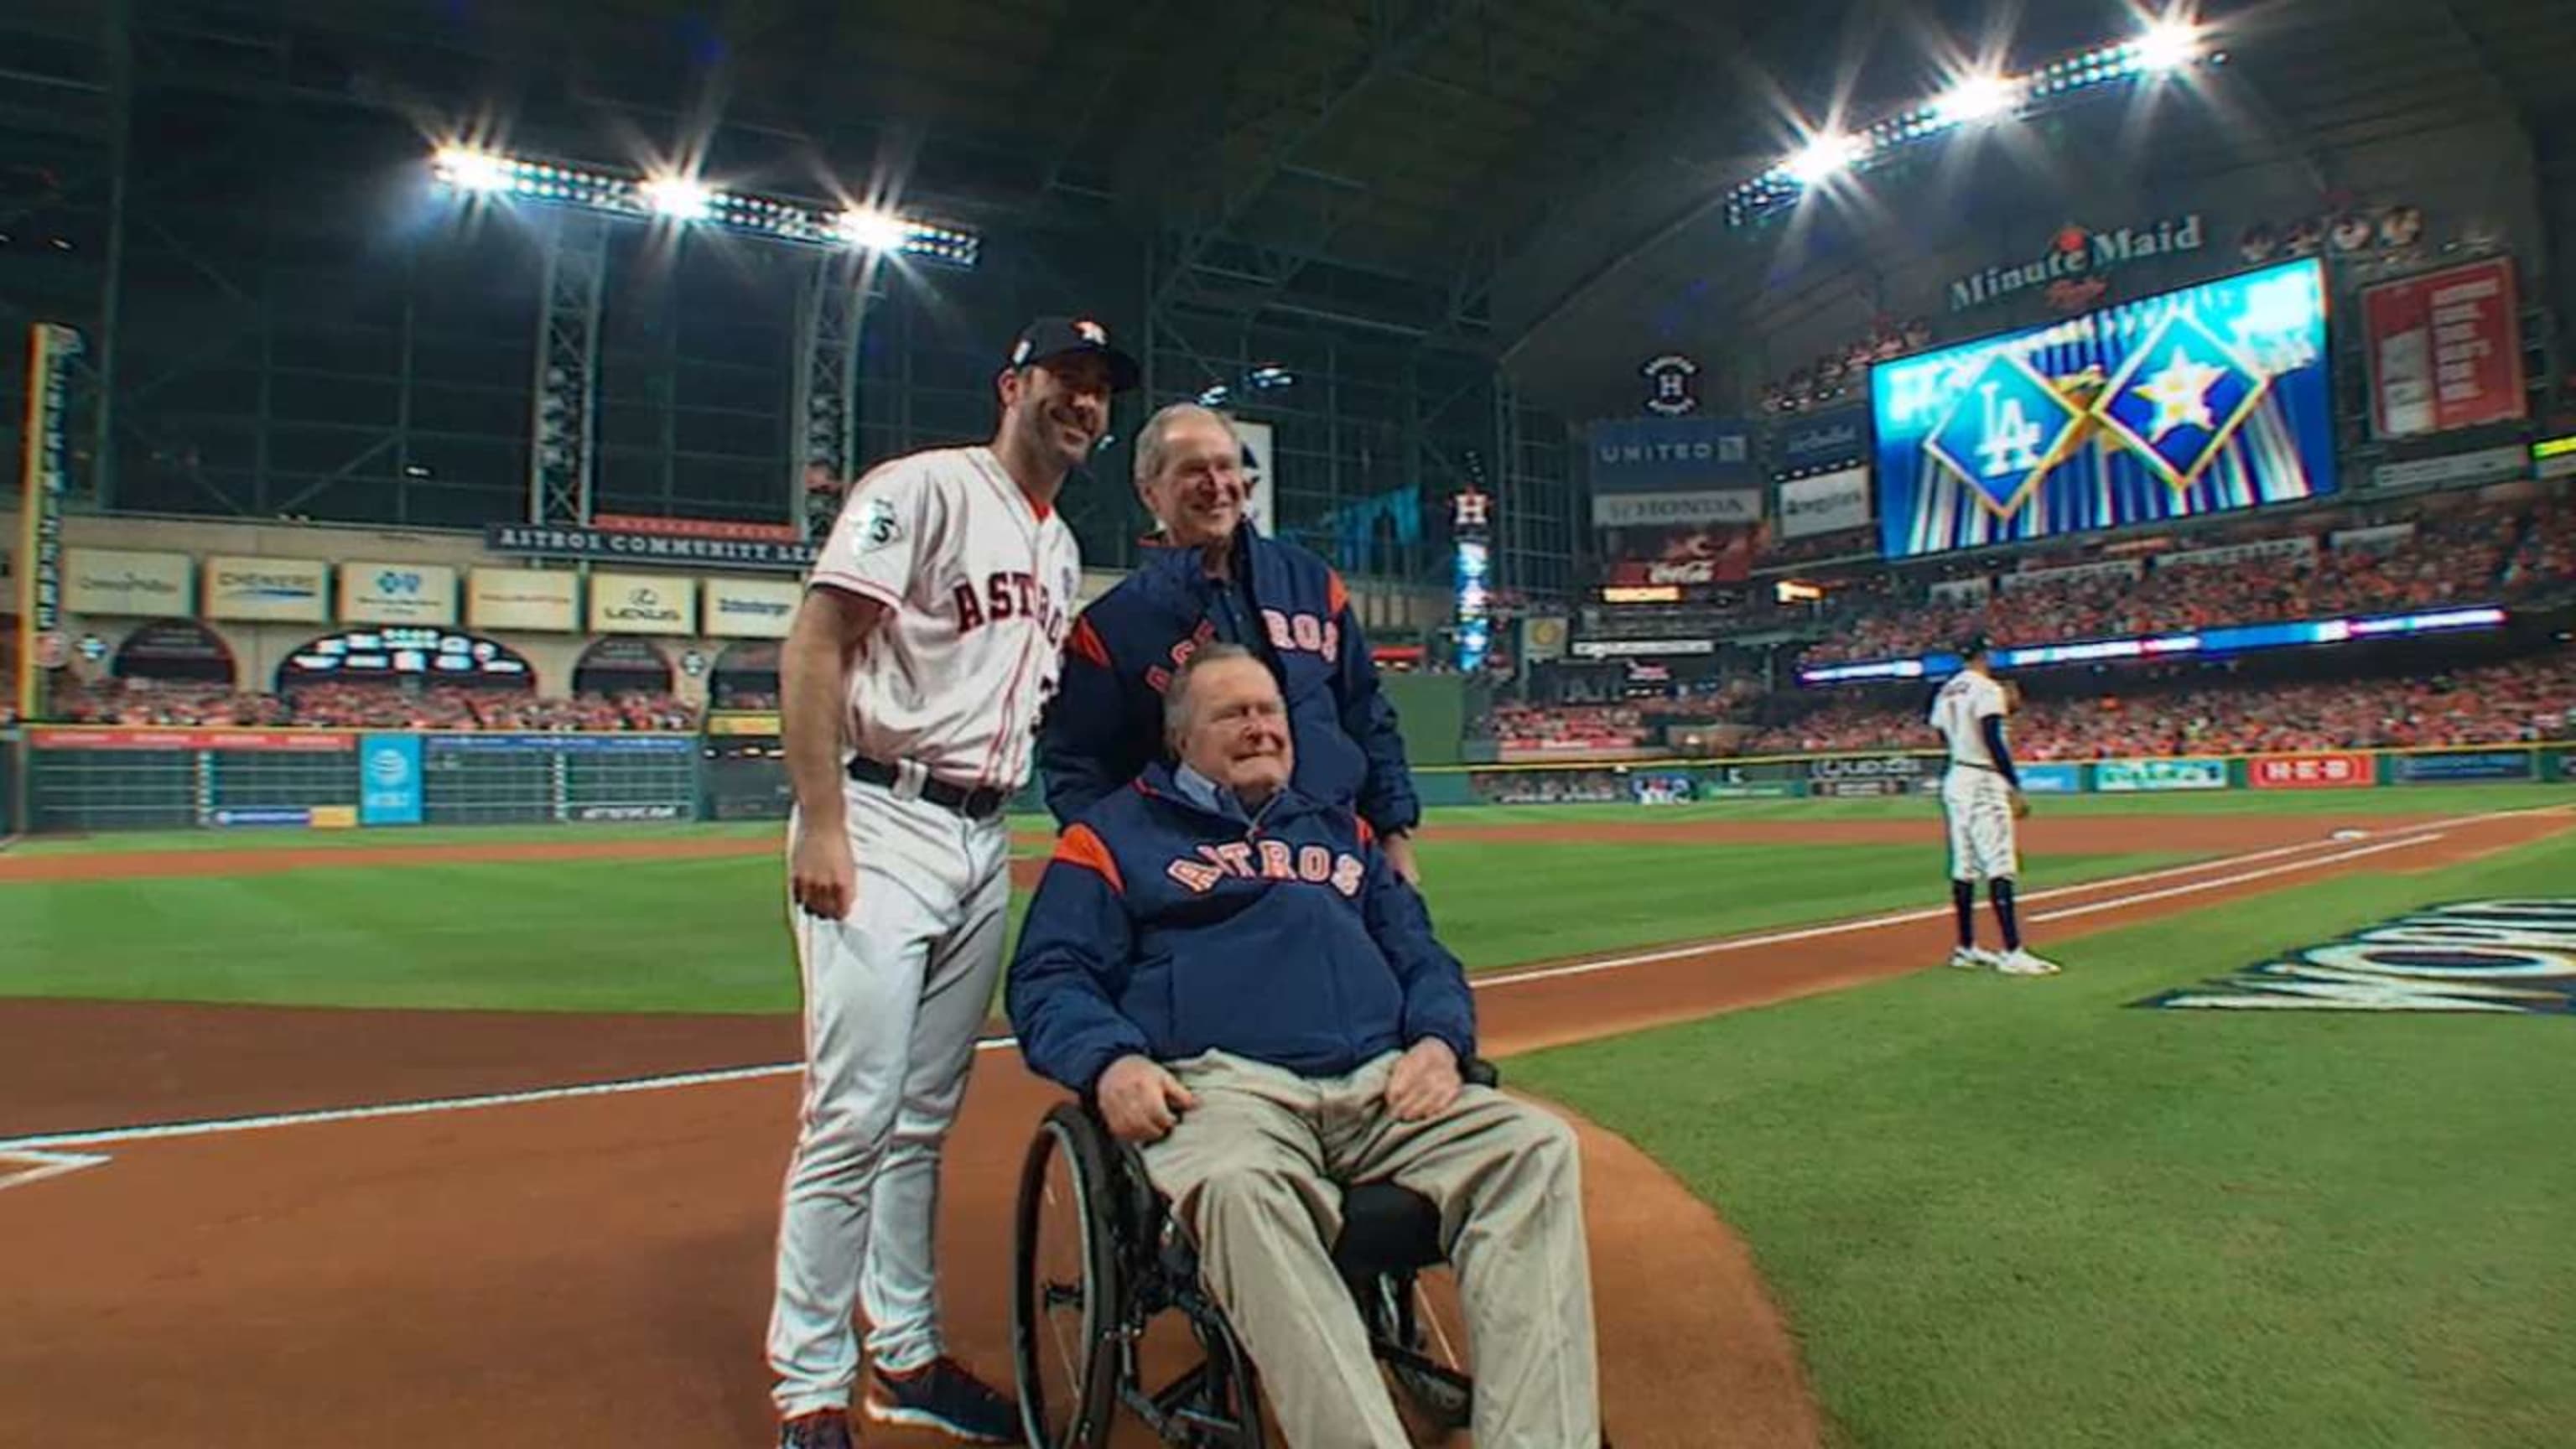 Love Craig Biggio. A class act on and off the field!